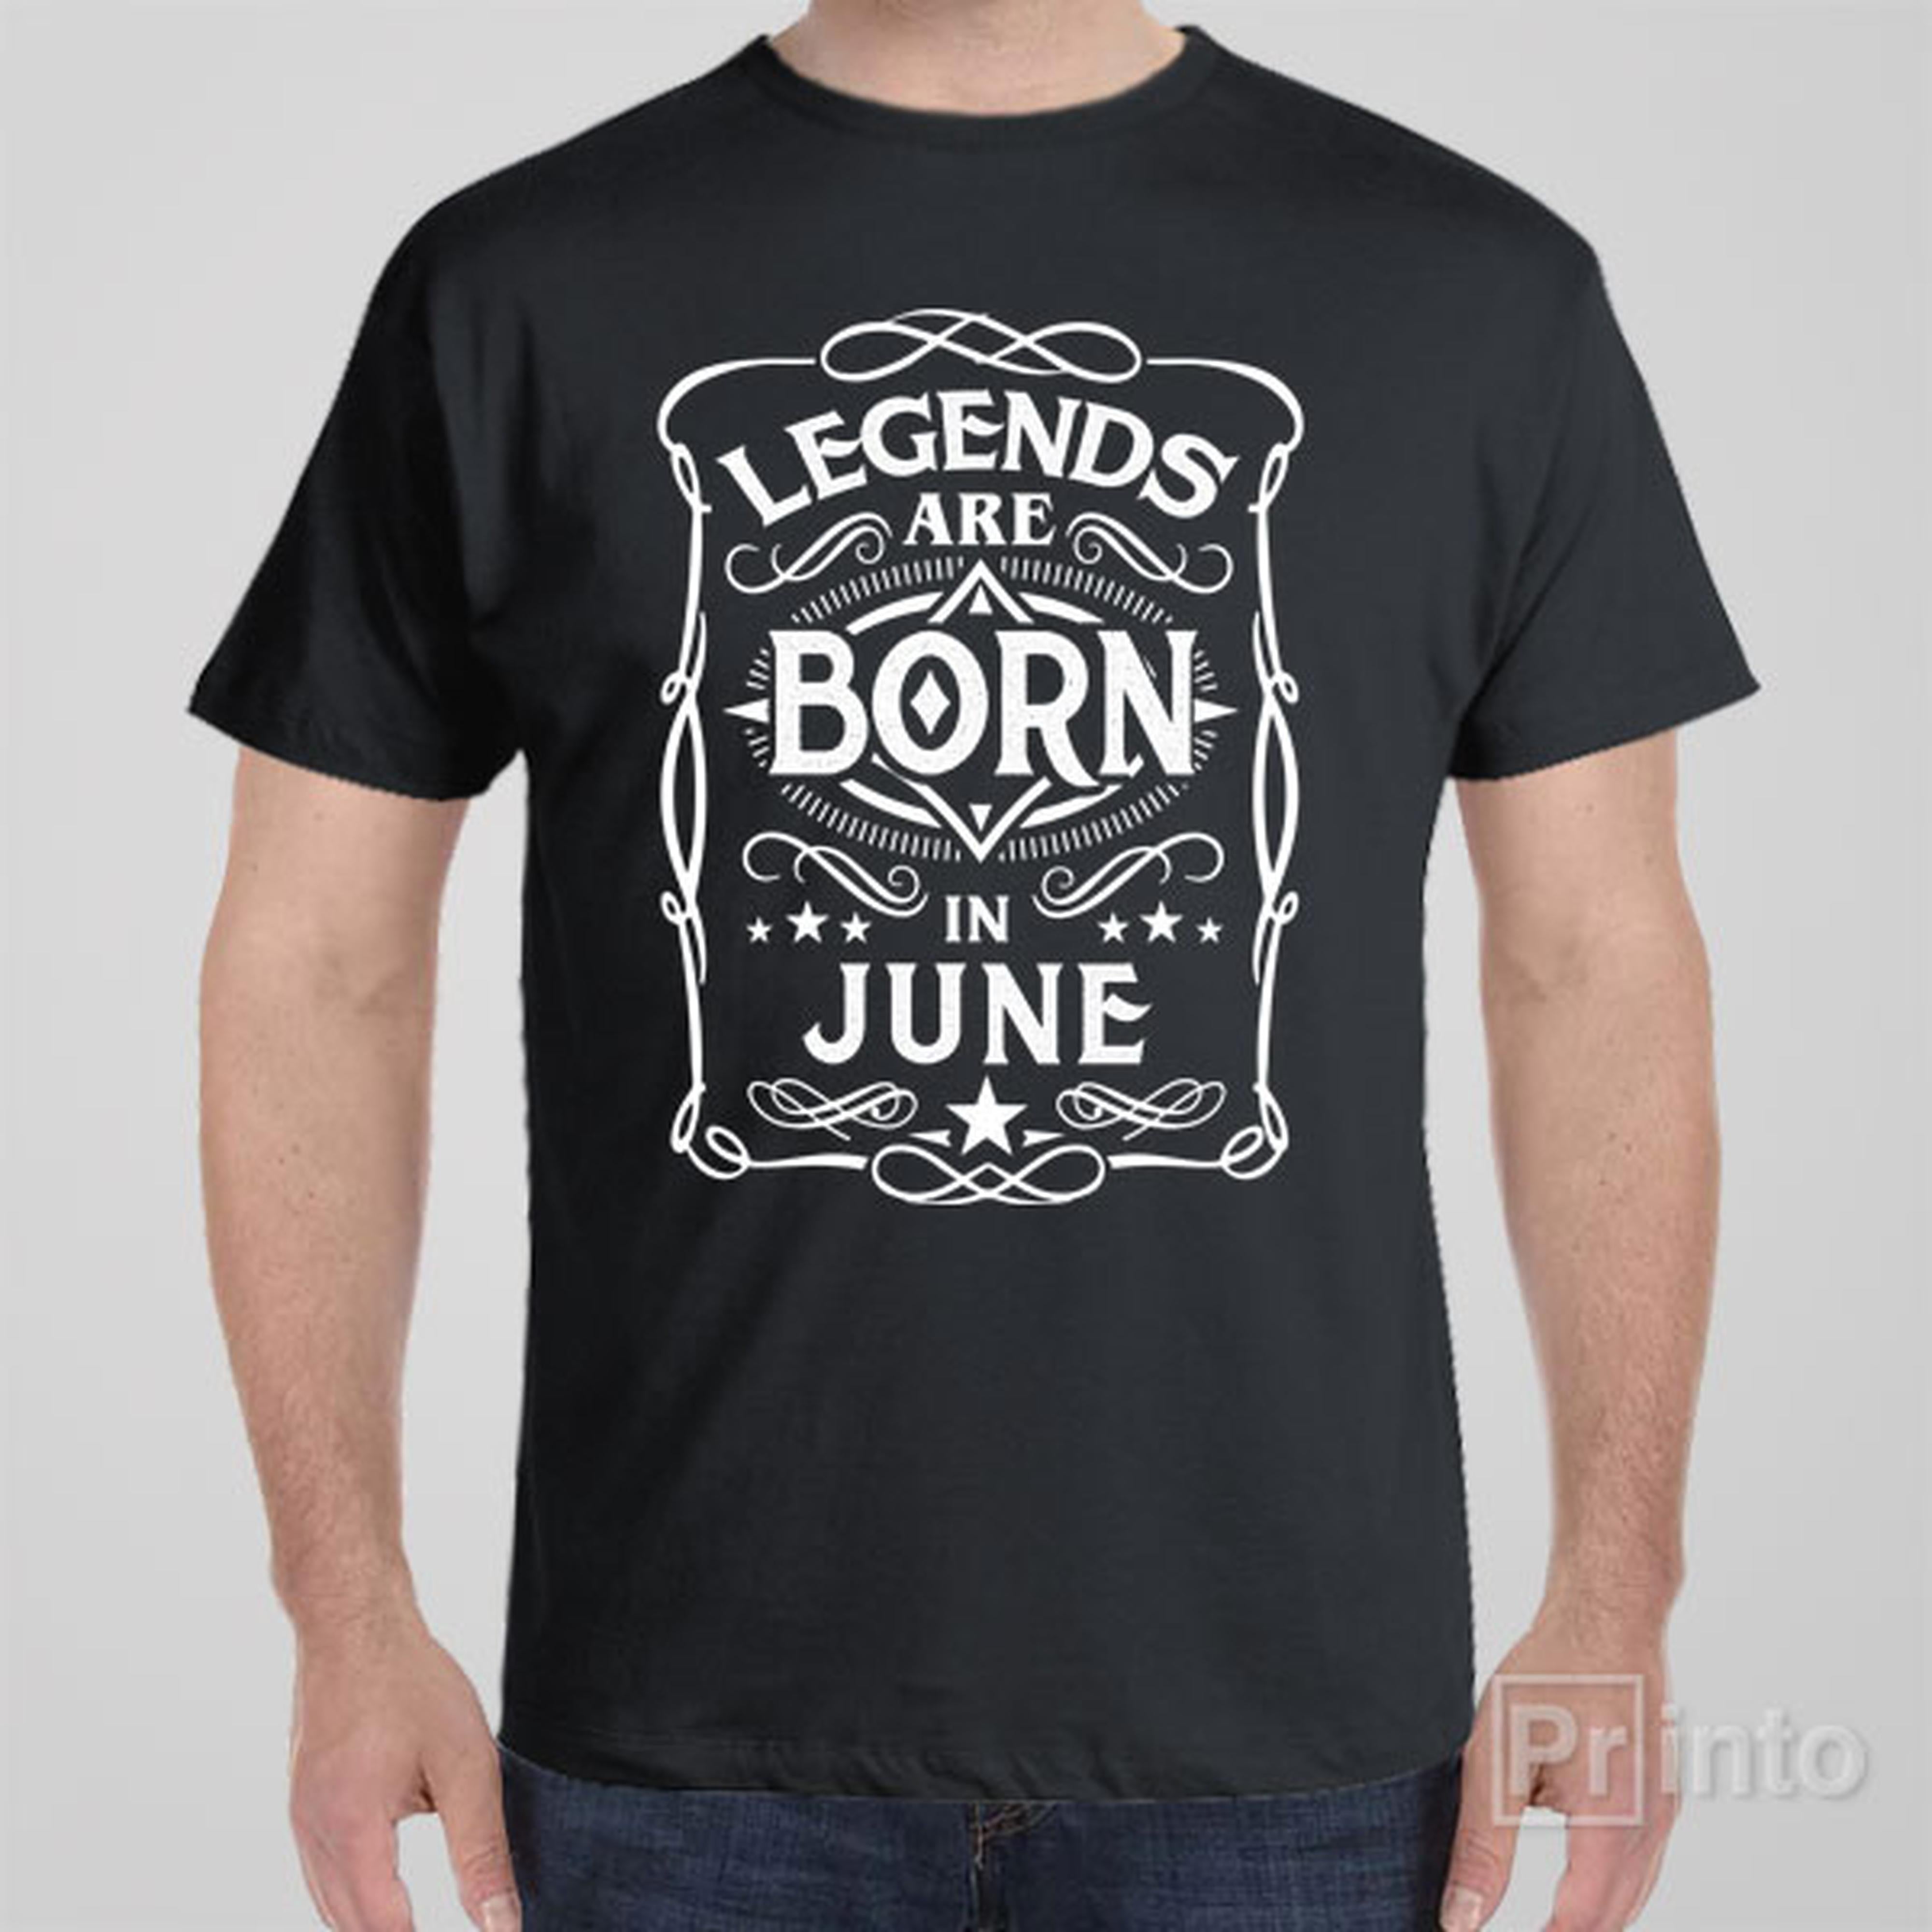 legends-are-born-in-june-t-shirt